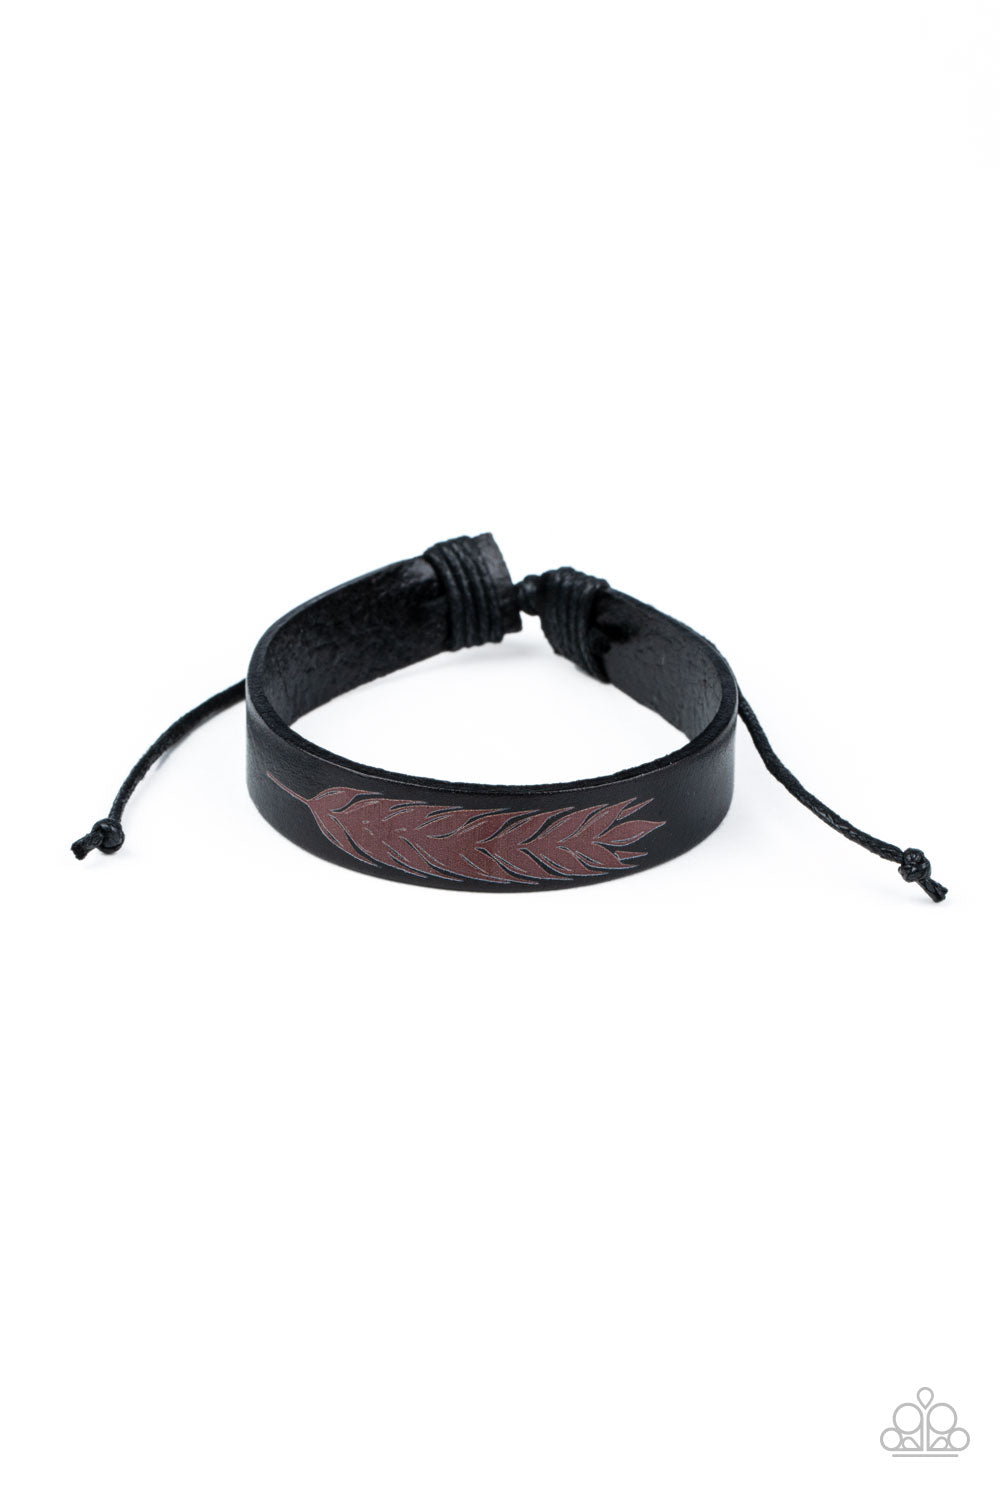 This QUILL All Be Yours - black - Paparazzi bracelet